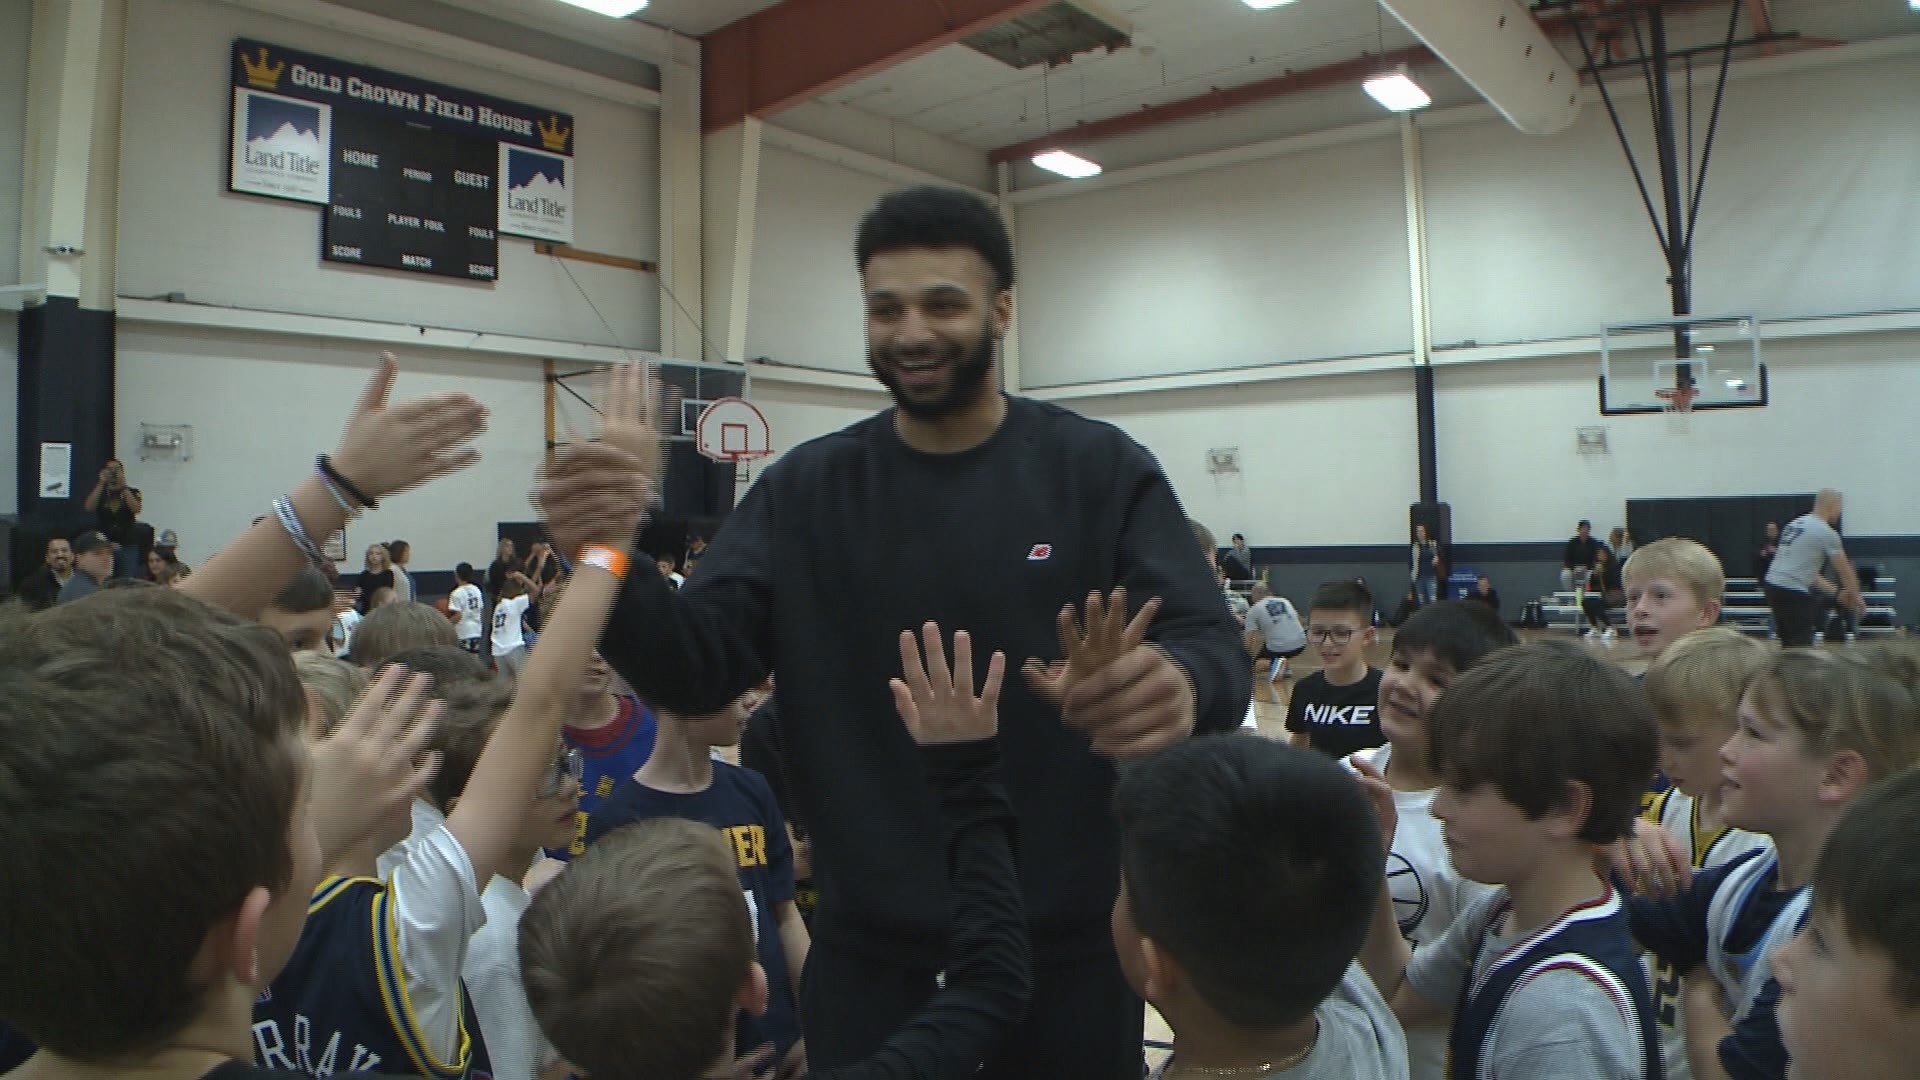 The Denver Nuggets star gave back to young basketball players in the community on Saturday.